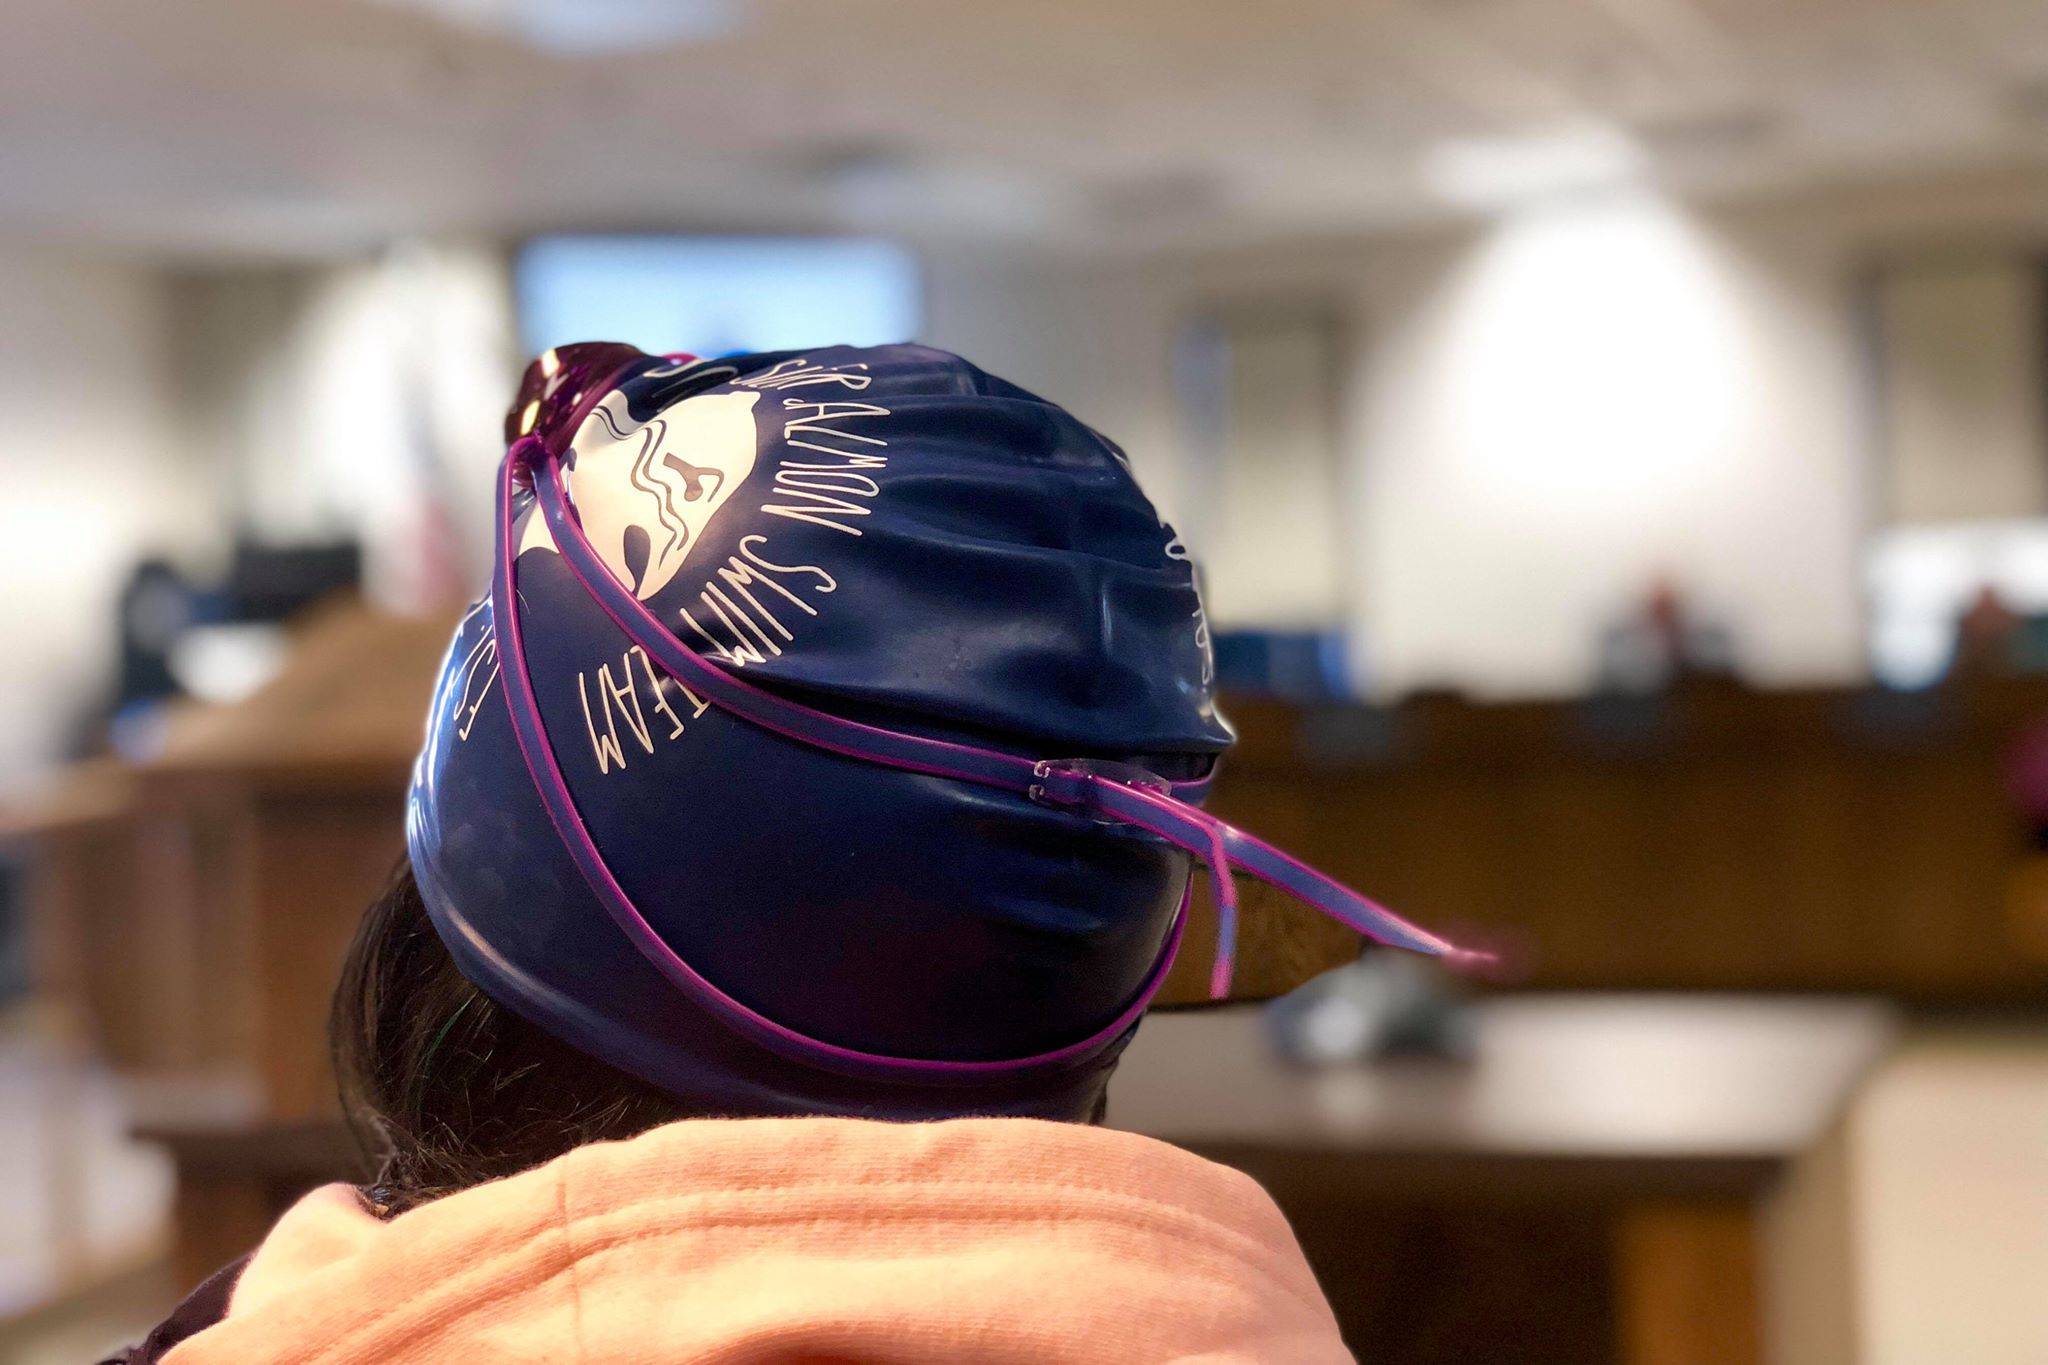 A Soldotna Silver Salmon Swim Team member listens to testimony in support of keeping the Kenai Peninsula Borough School District’s pools open, in light of potential budget cuts, on Monday, April 1, 2019, in Soldotna, Alaska. (Photo by Victoria Petersen/Peninsula Clarion)